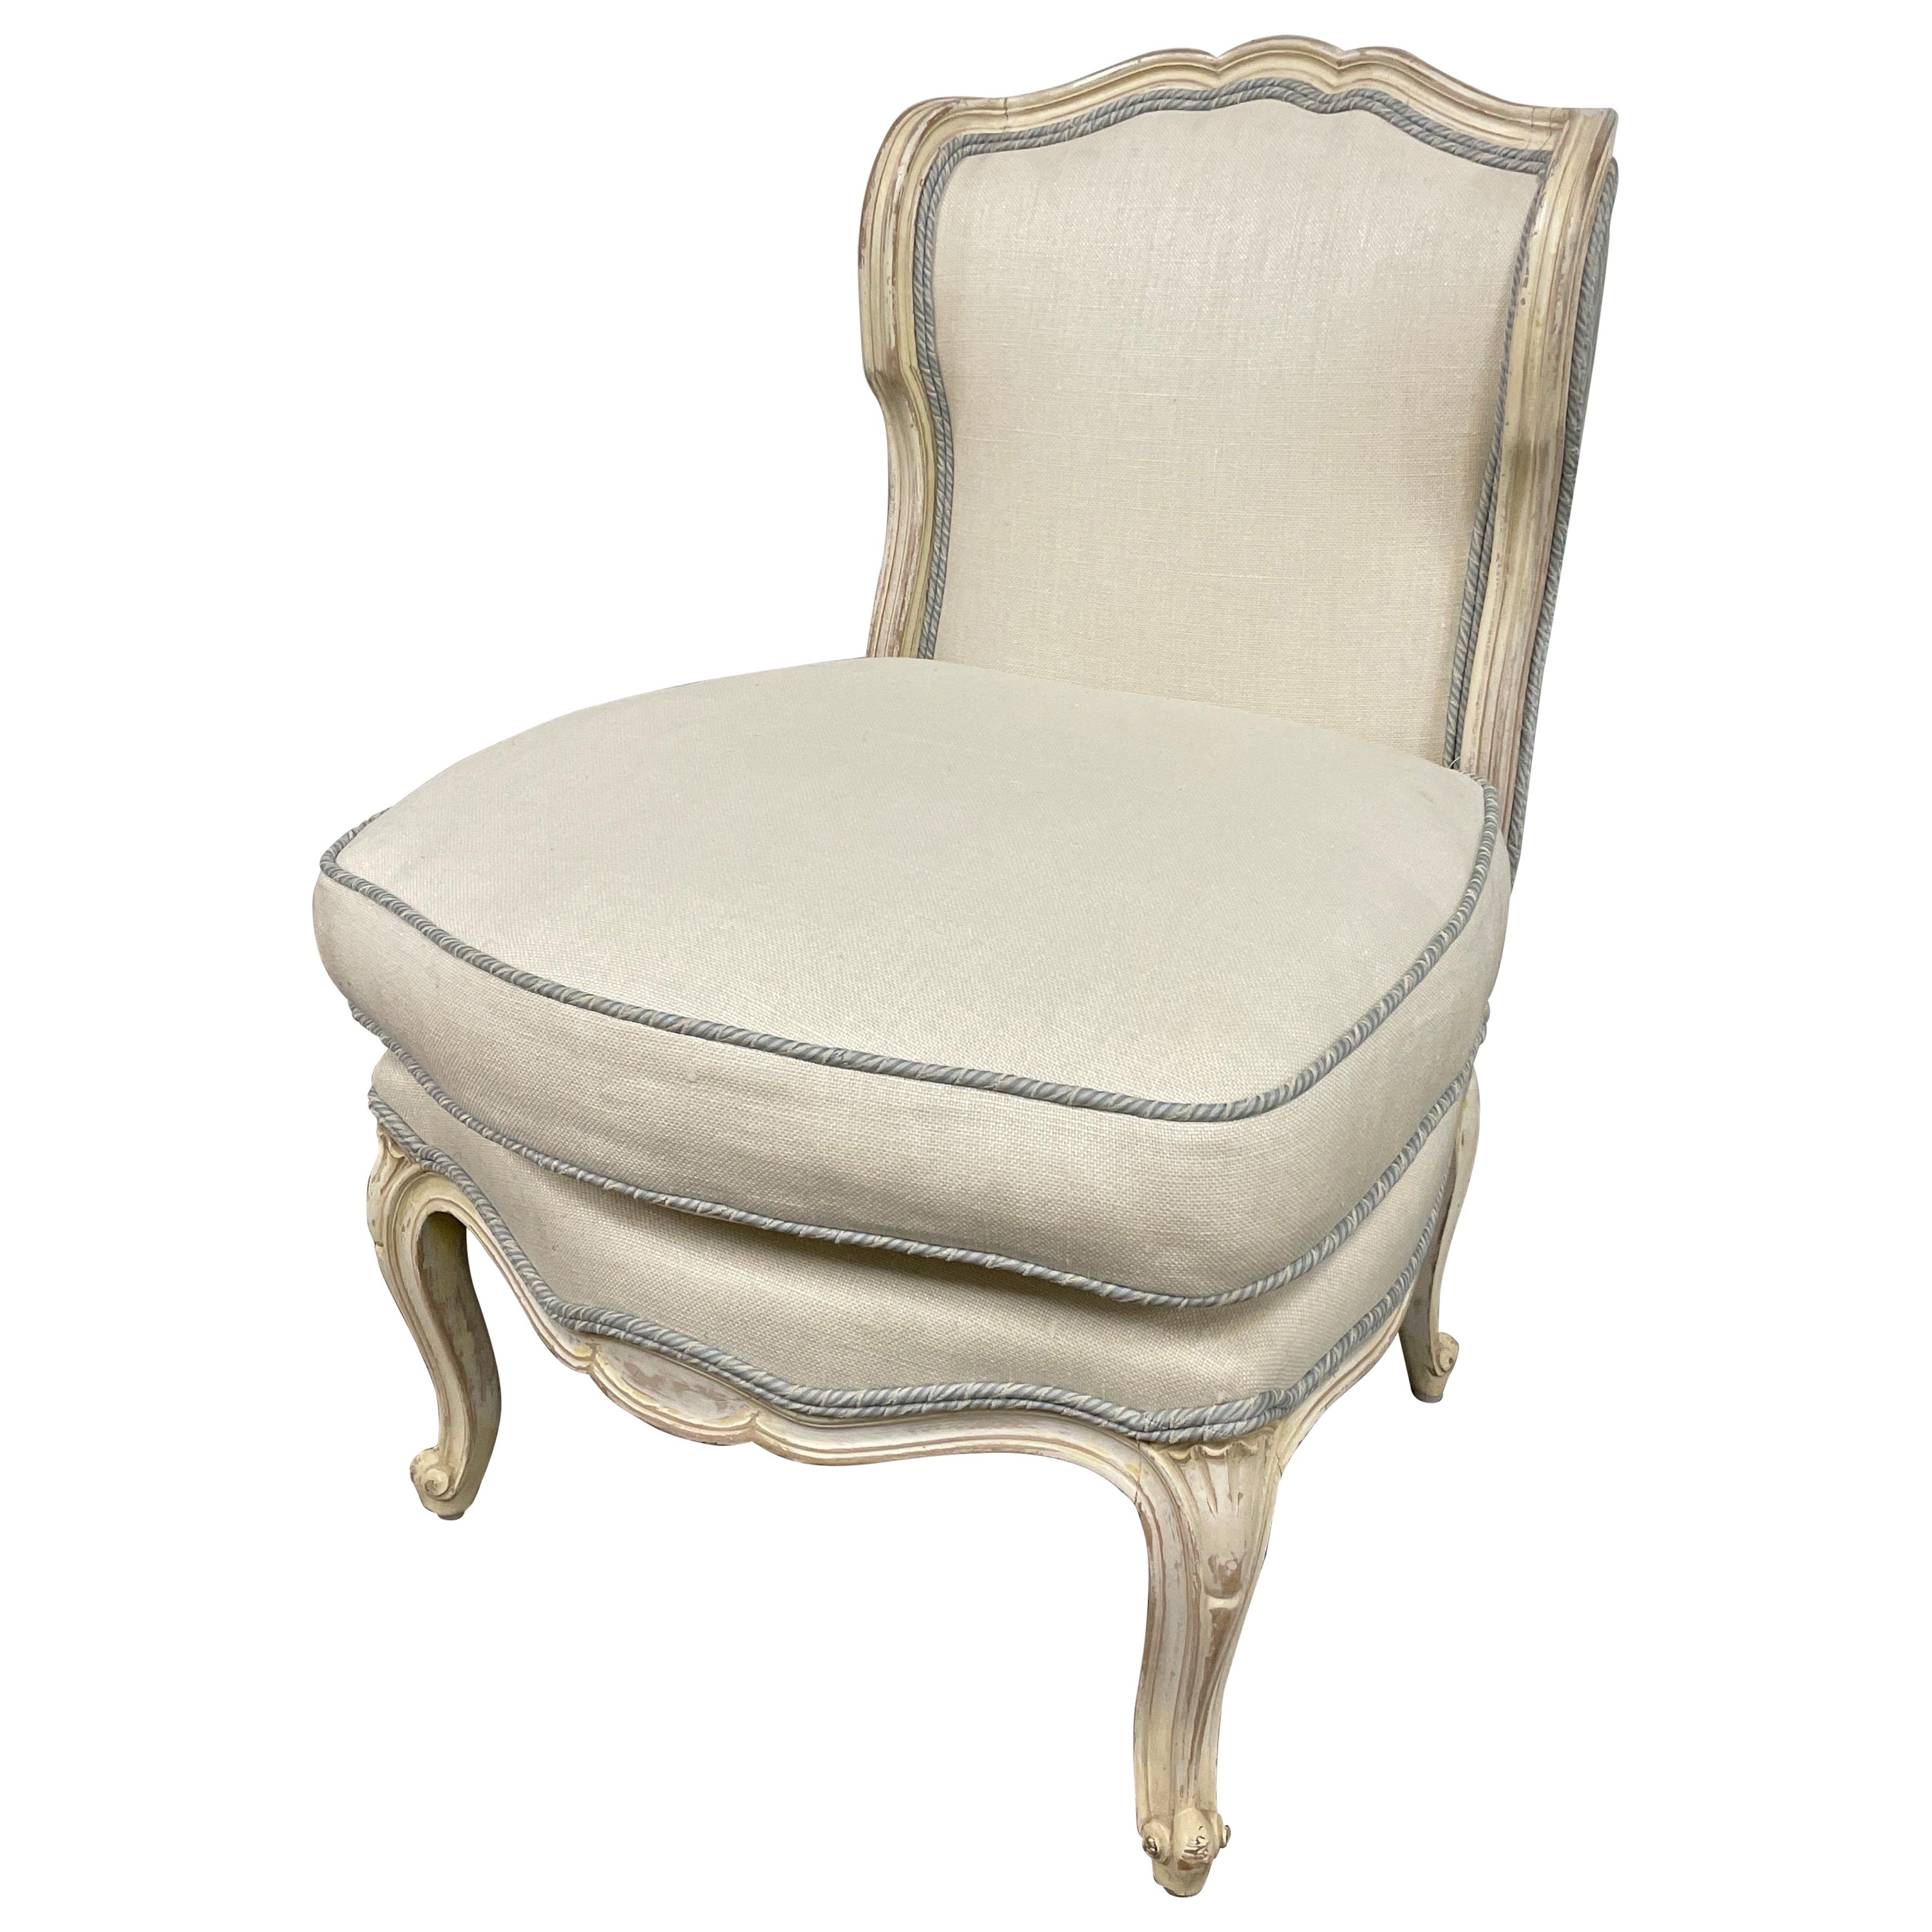 Antique French Louis XV Style Slipper Chair